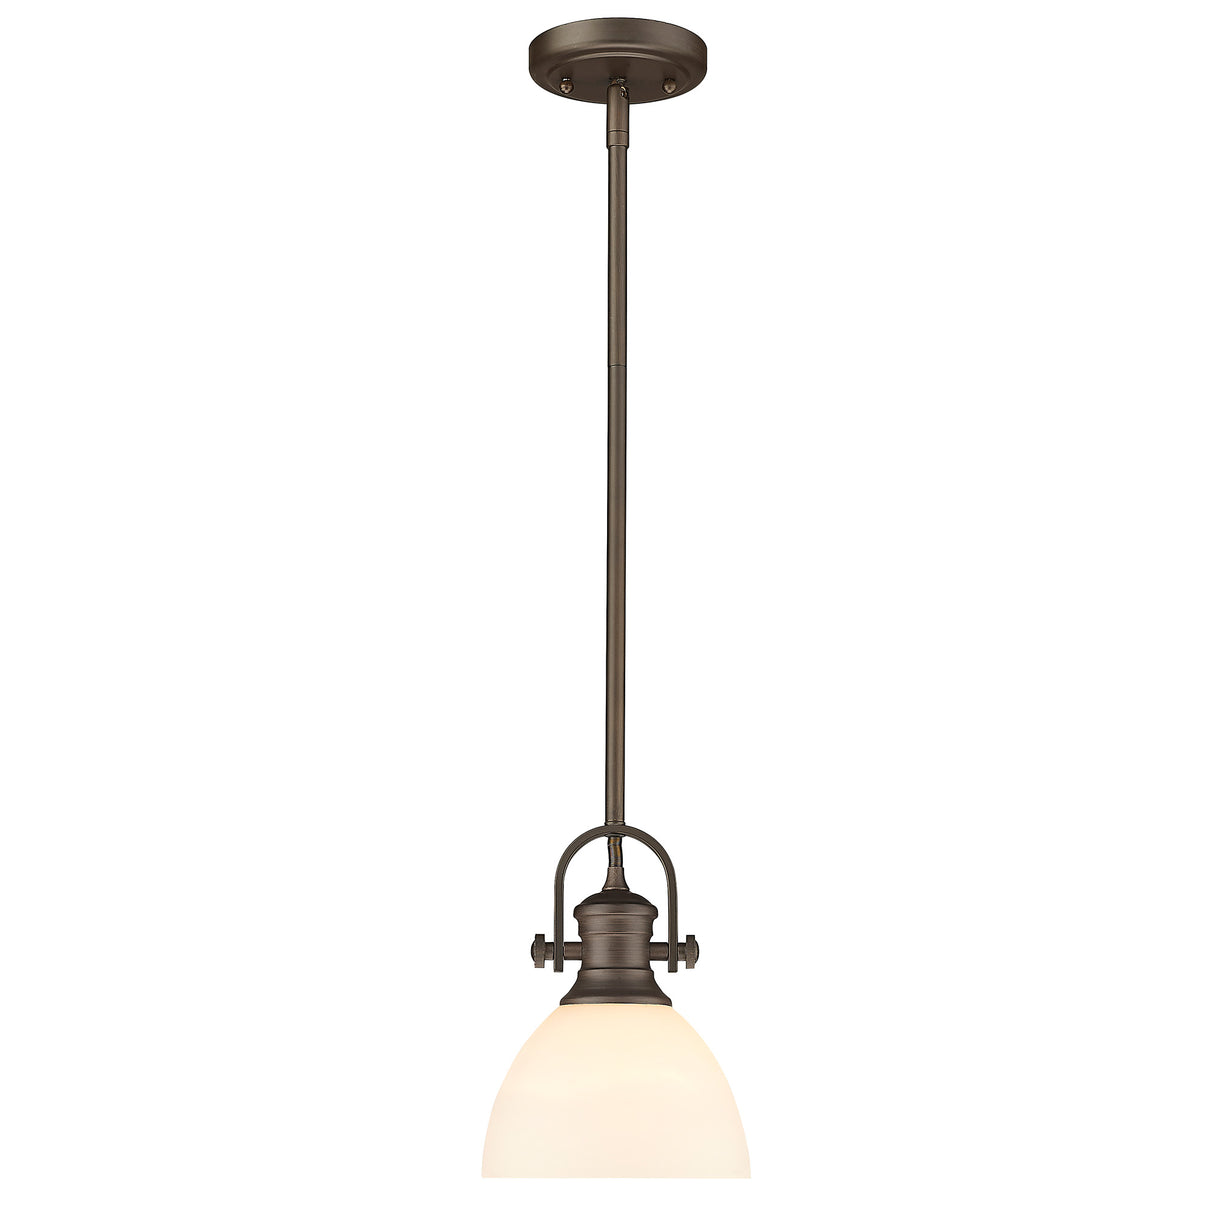 Hines Mini Pendant in Rubbed Bronze with Opal Glass